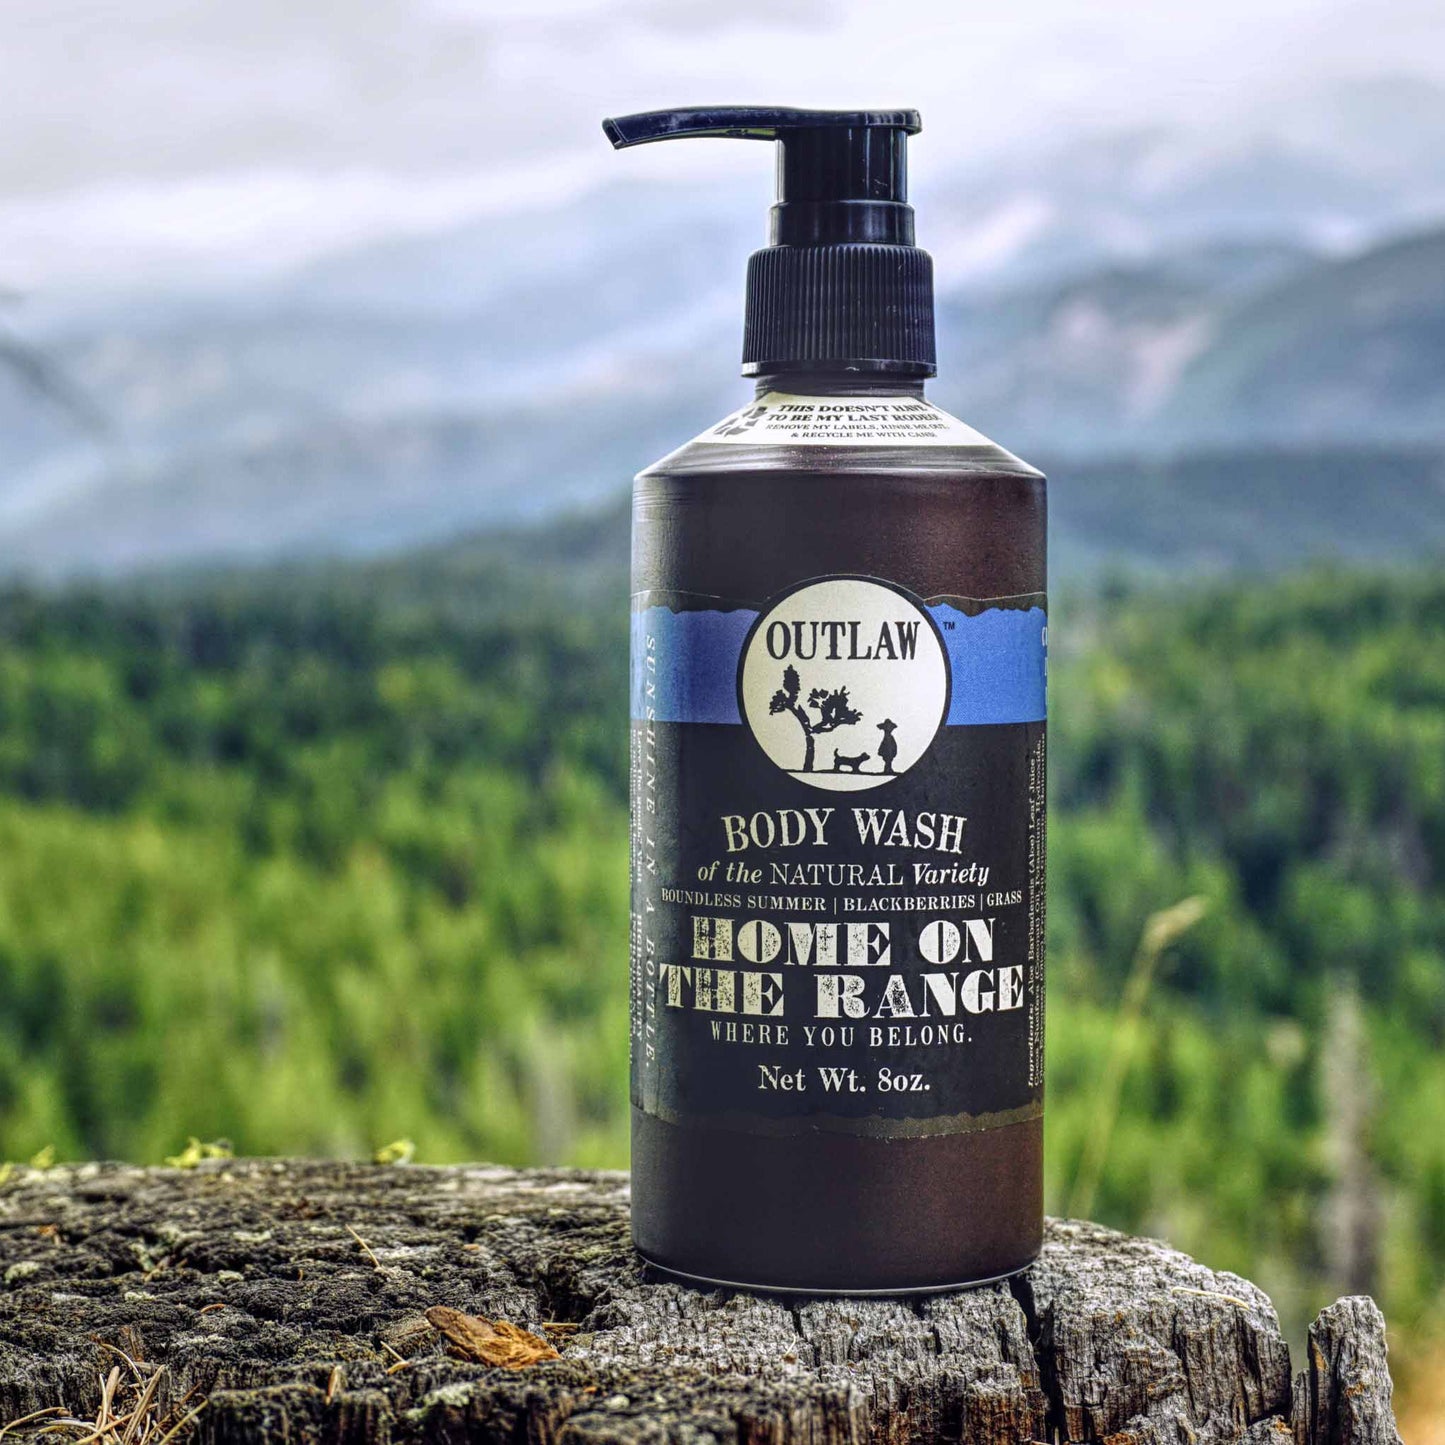 Natural body wash with laundry and berry scent by Outlaw